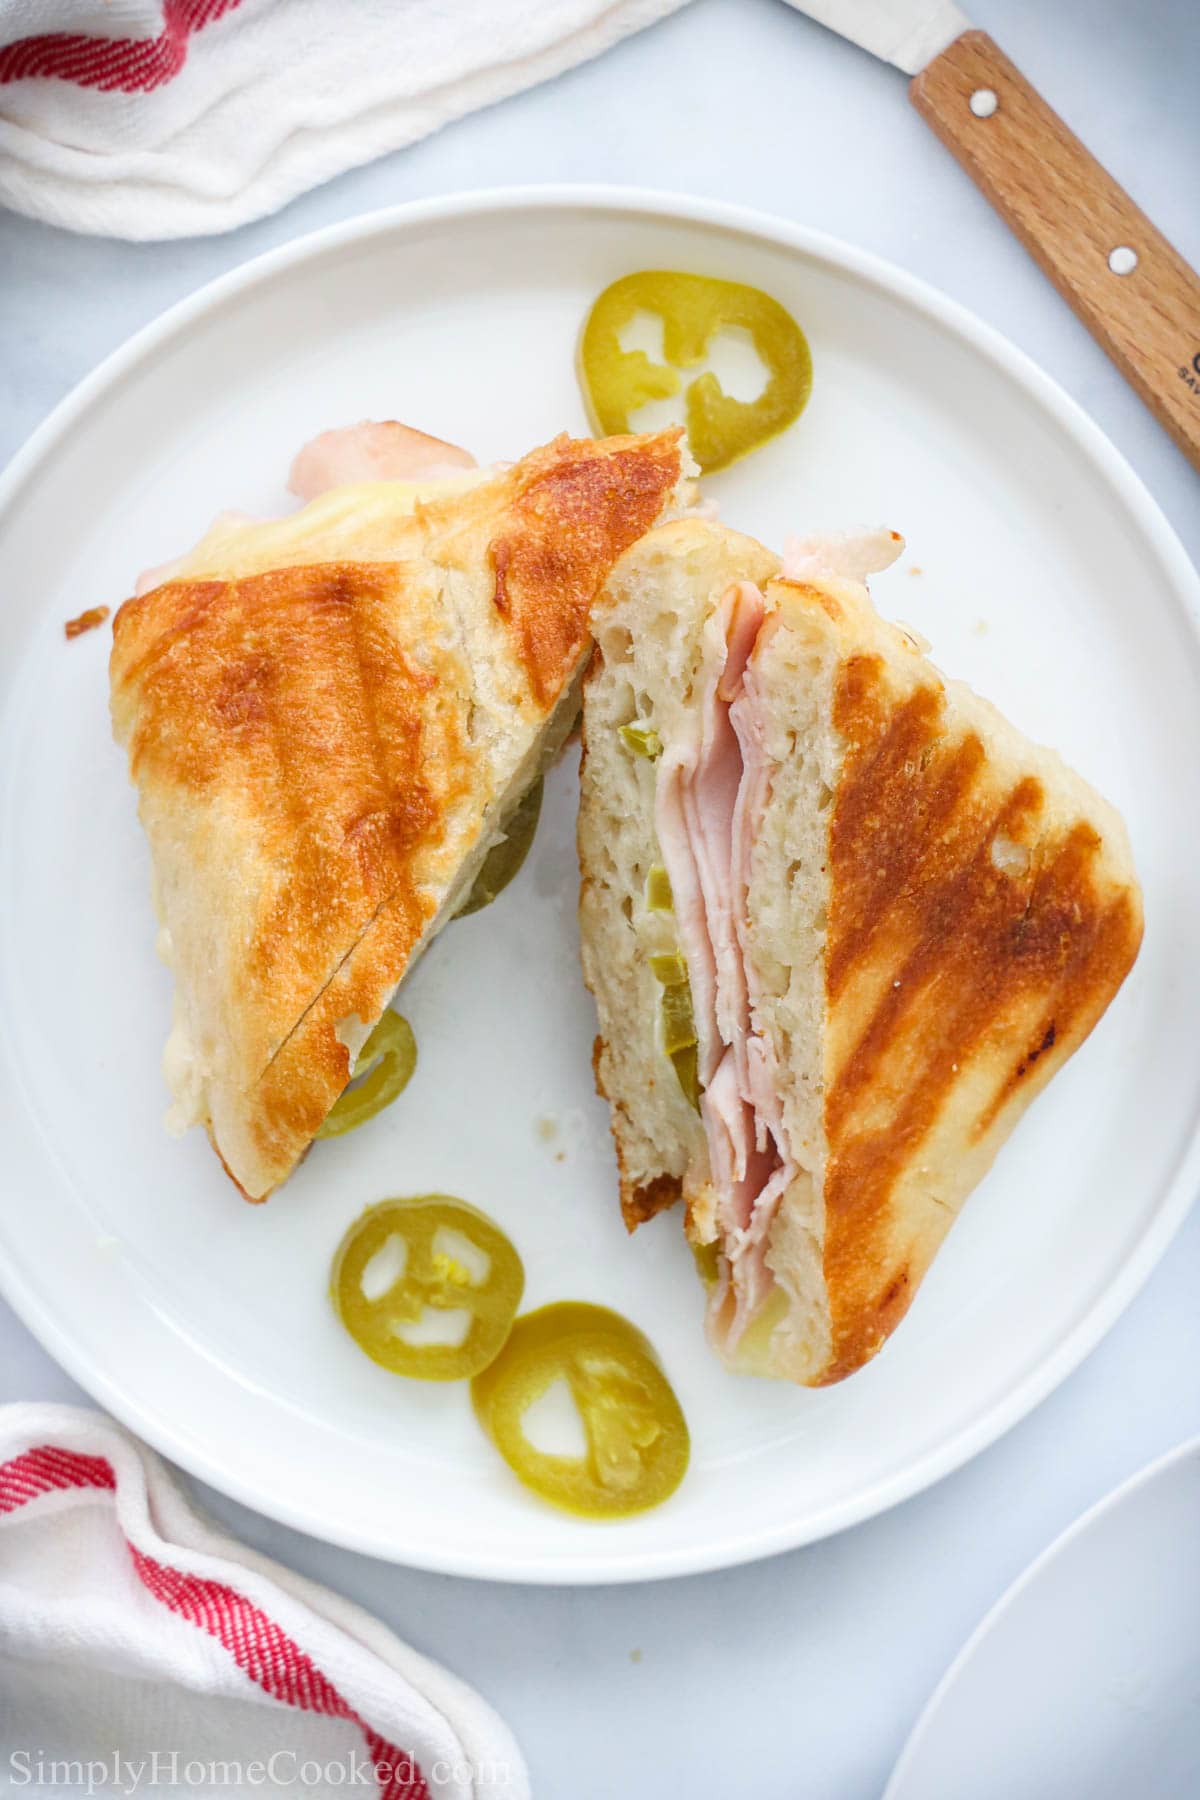 Overhead view of Turkey Panini sliced in half on a white plate with jalapeno slices.